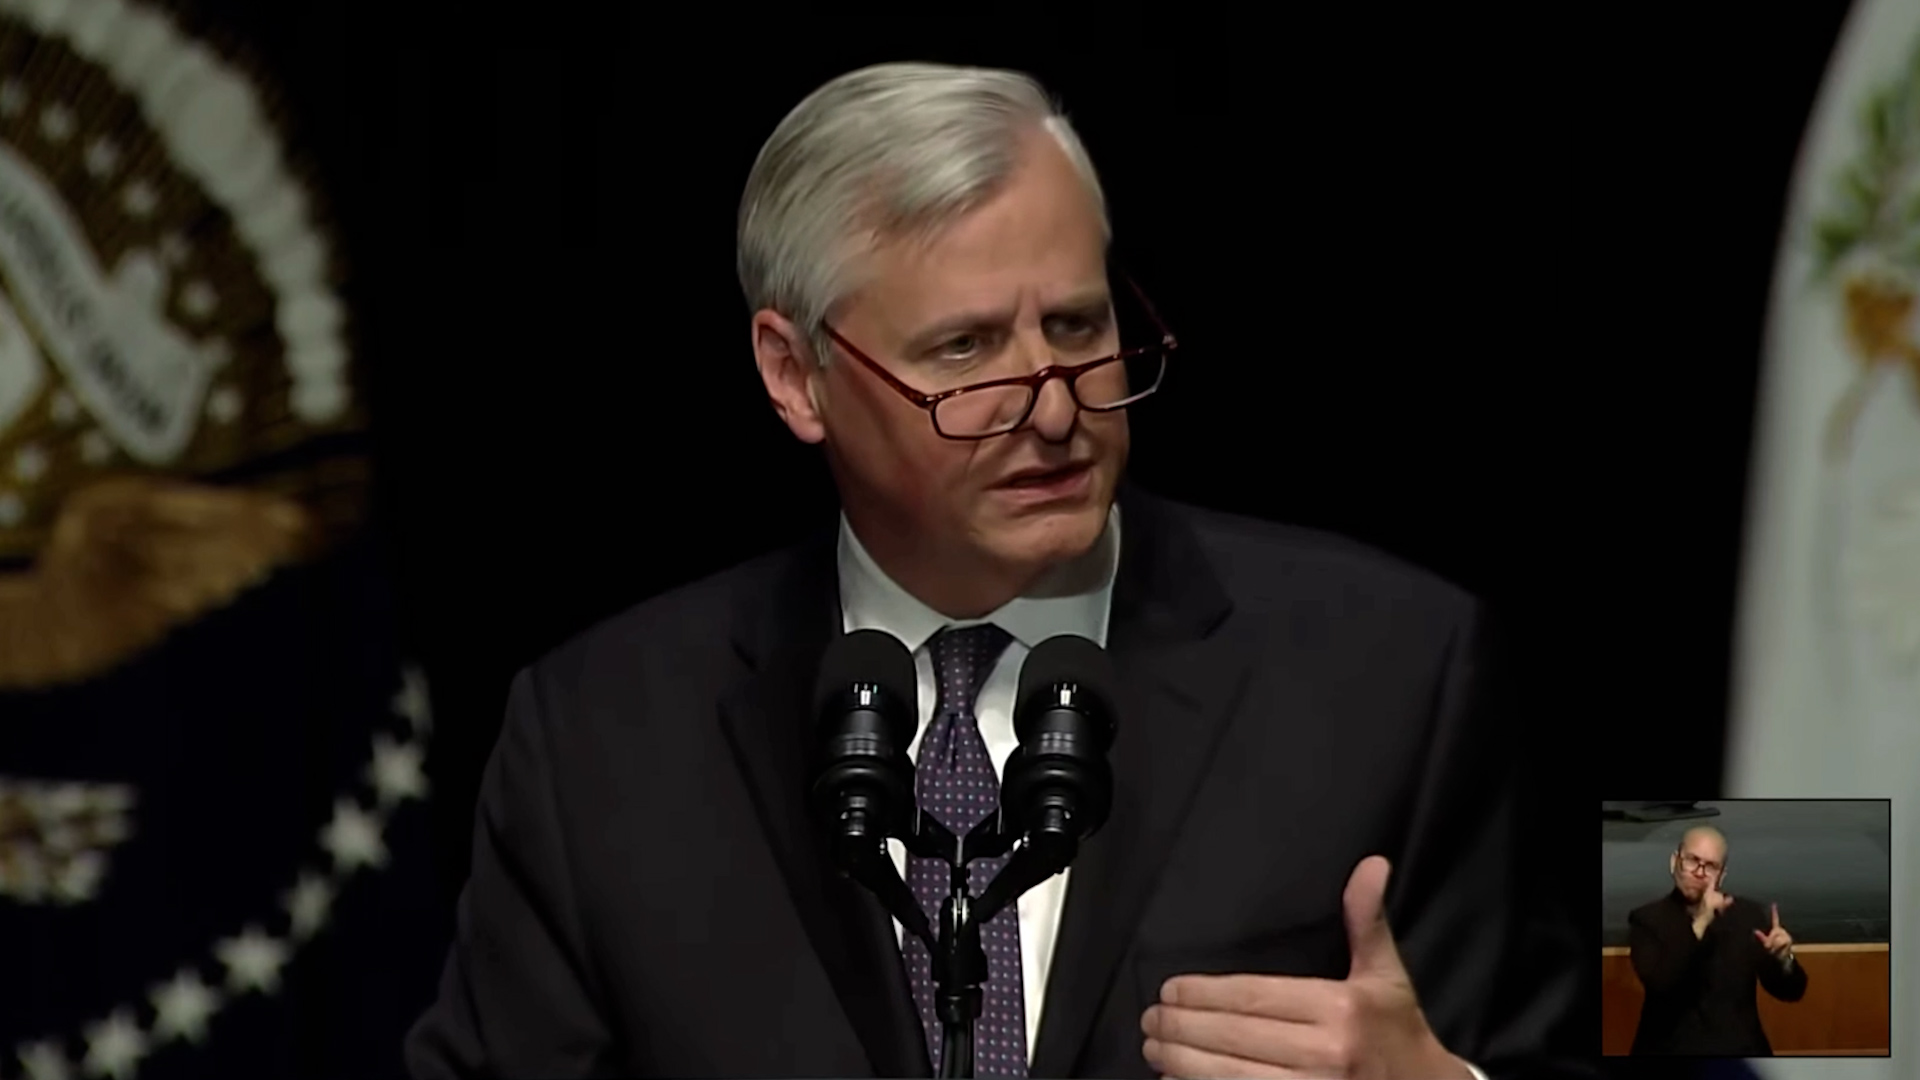 Presidential historian Jon Meacham said of Walter Mondale: 'He never stopped believing in this country. He never stopped fighting for its people. And he never stopped defending democracy.'